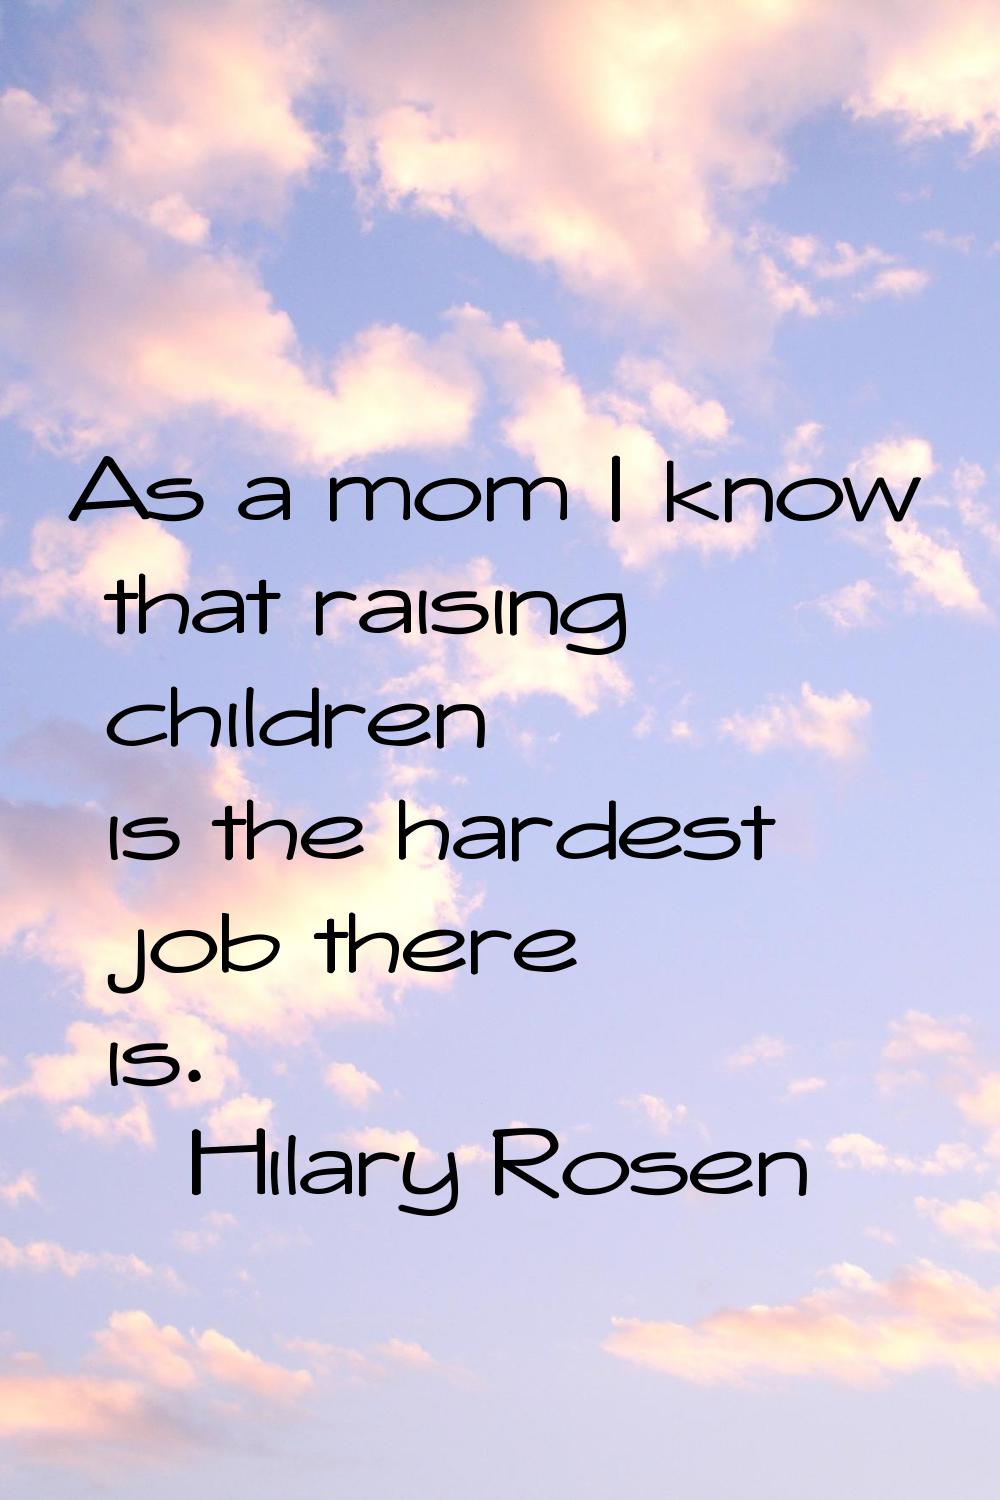 As a mom I know that raising children is the hardest job there is.